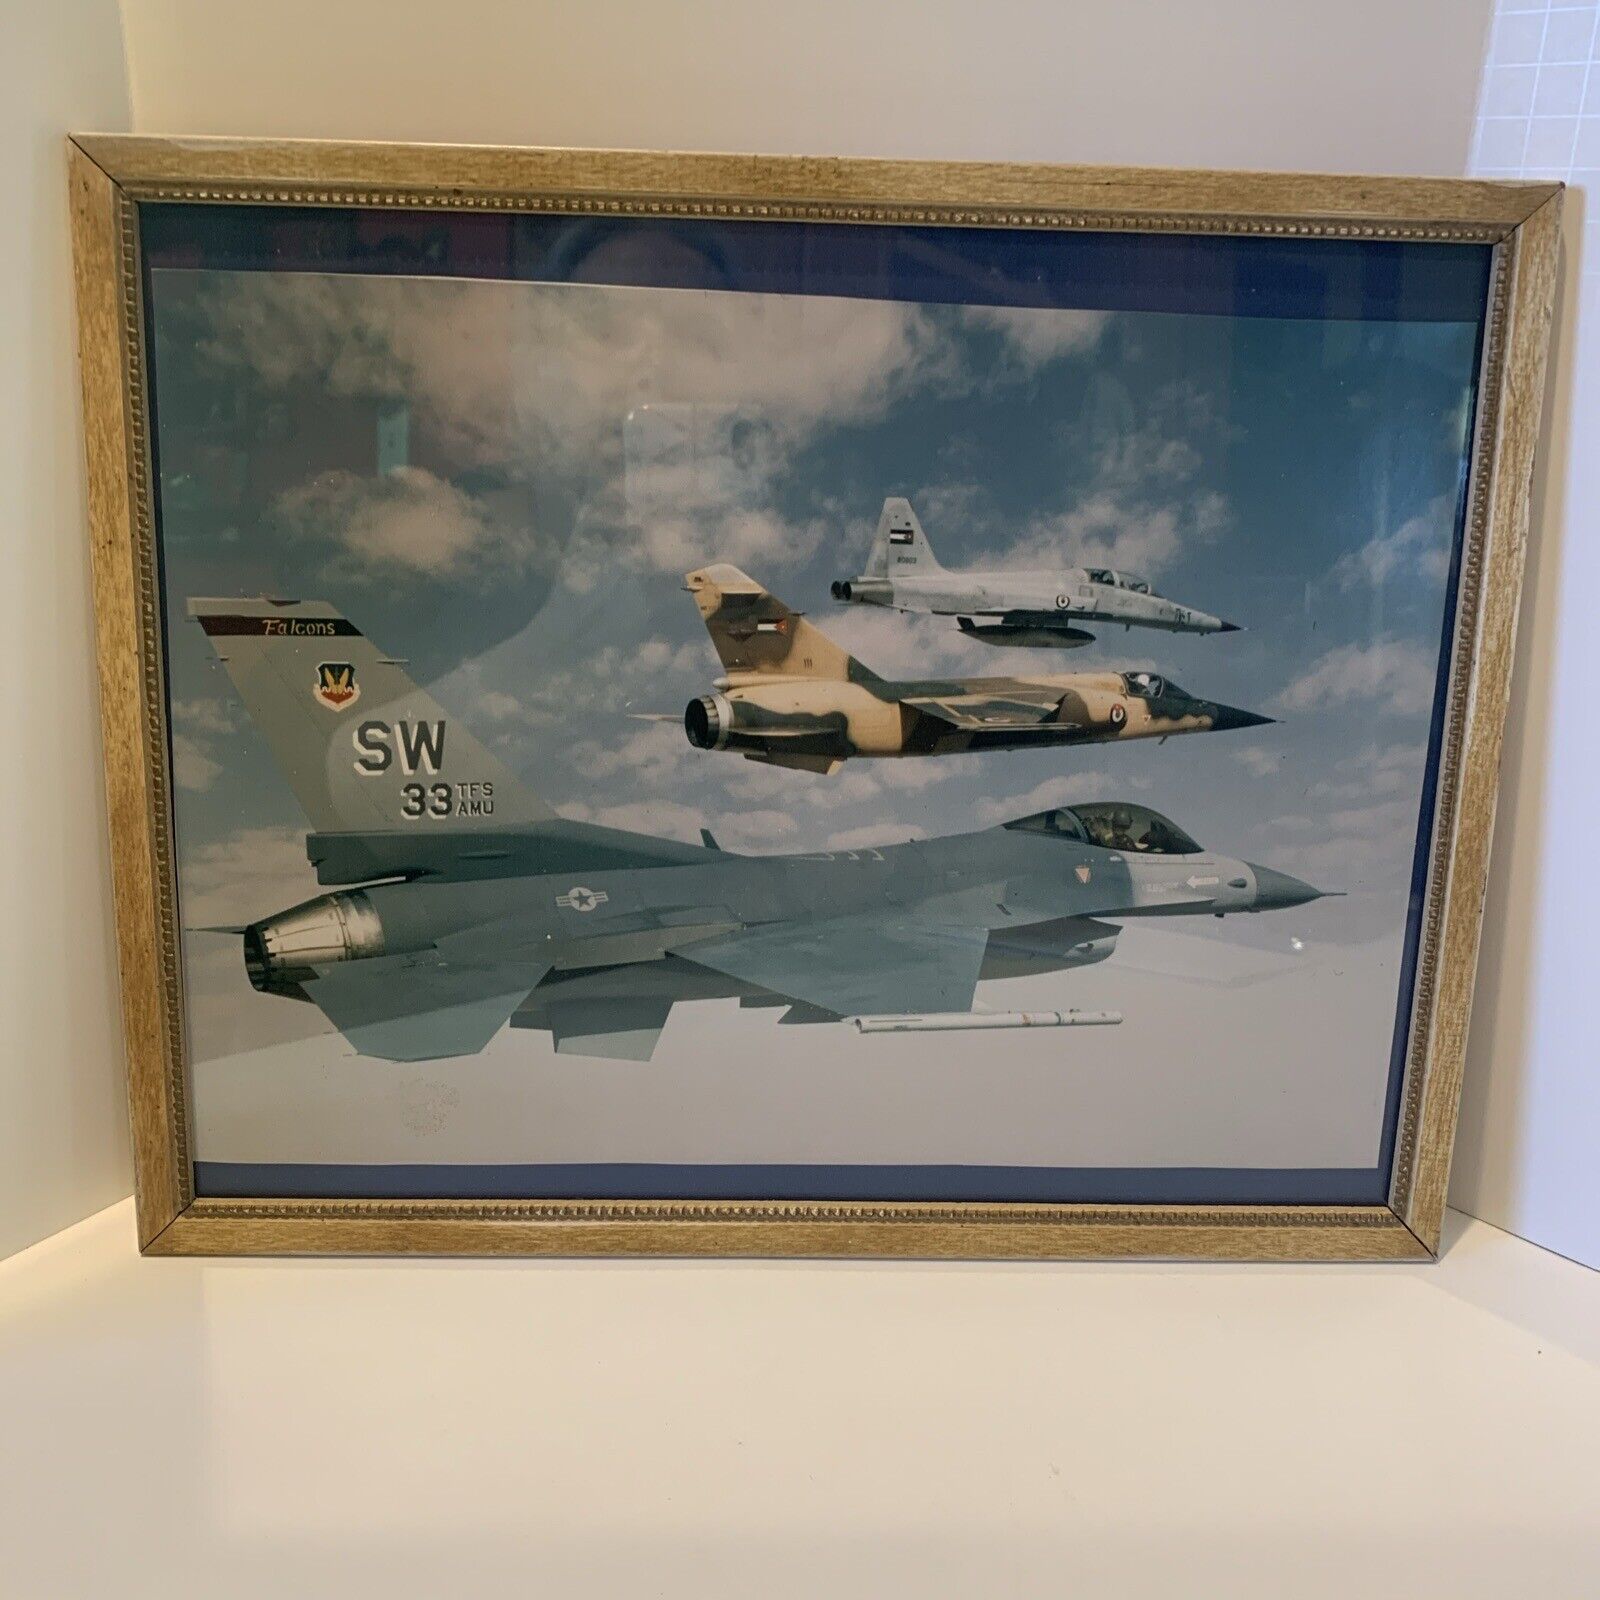 Photograph Of Three Fighter Jets In Flight In A 12”x15” Frame 